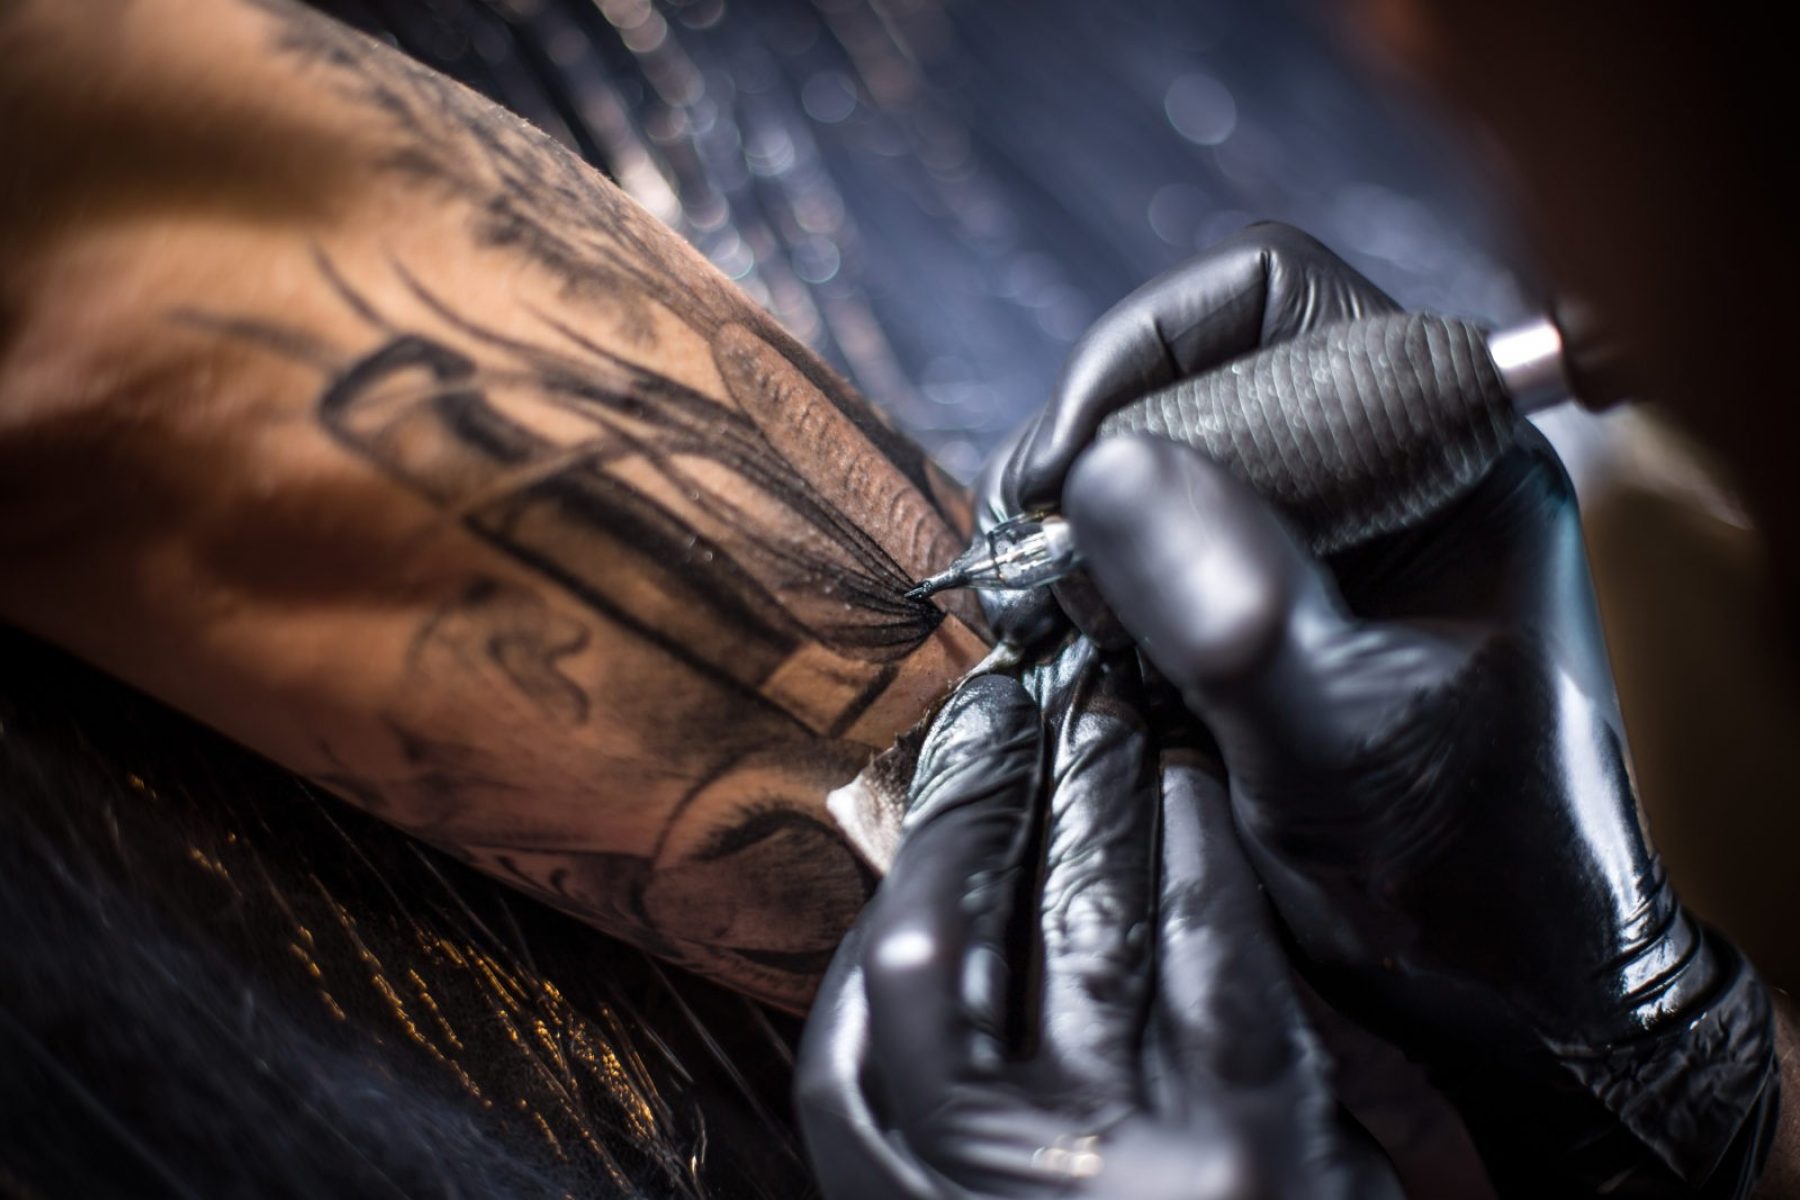 A professional tattoo artist introduces black ink into the skin using a needle from a tattoo machine.